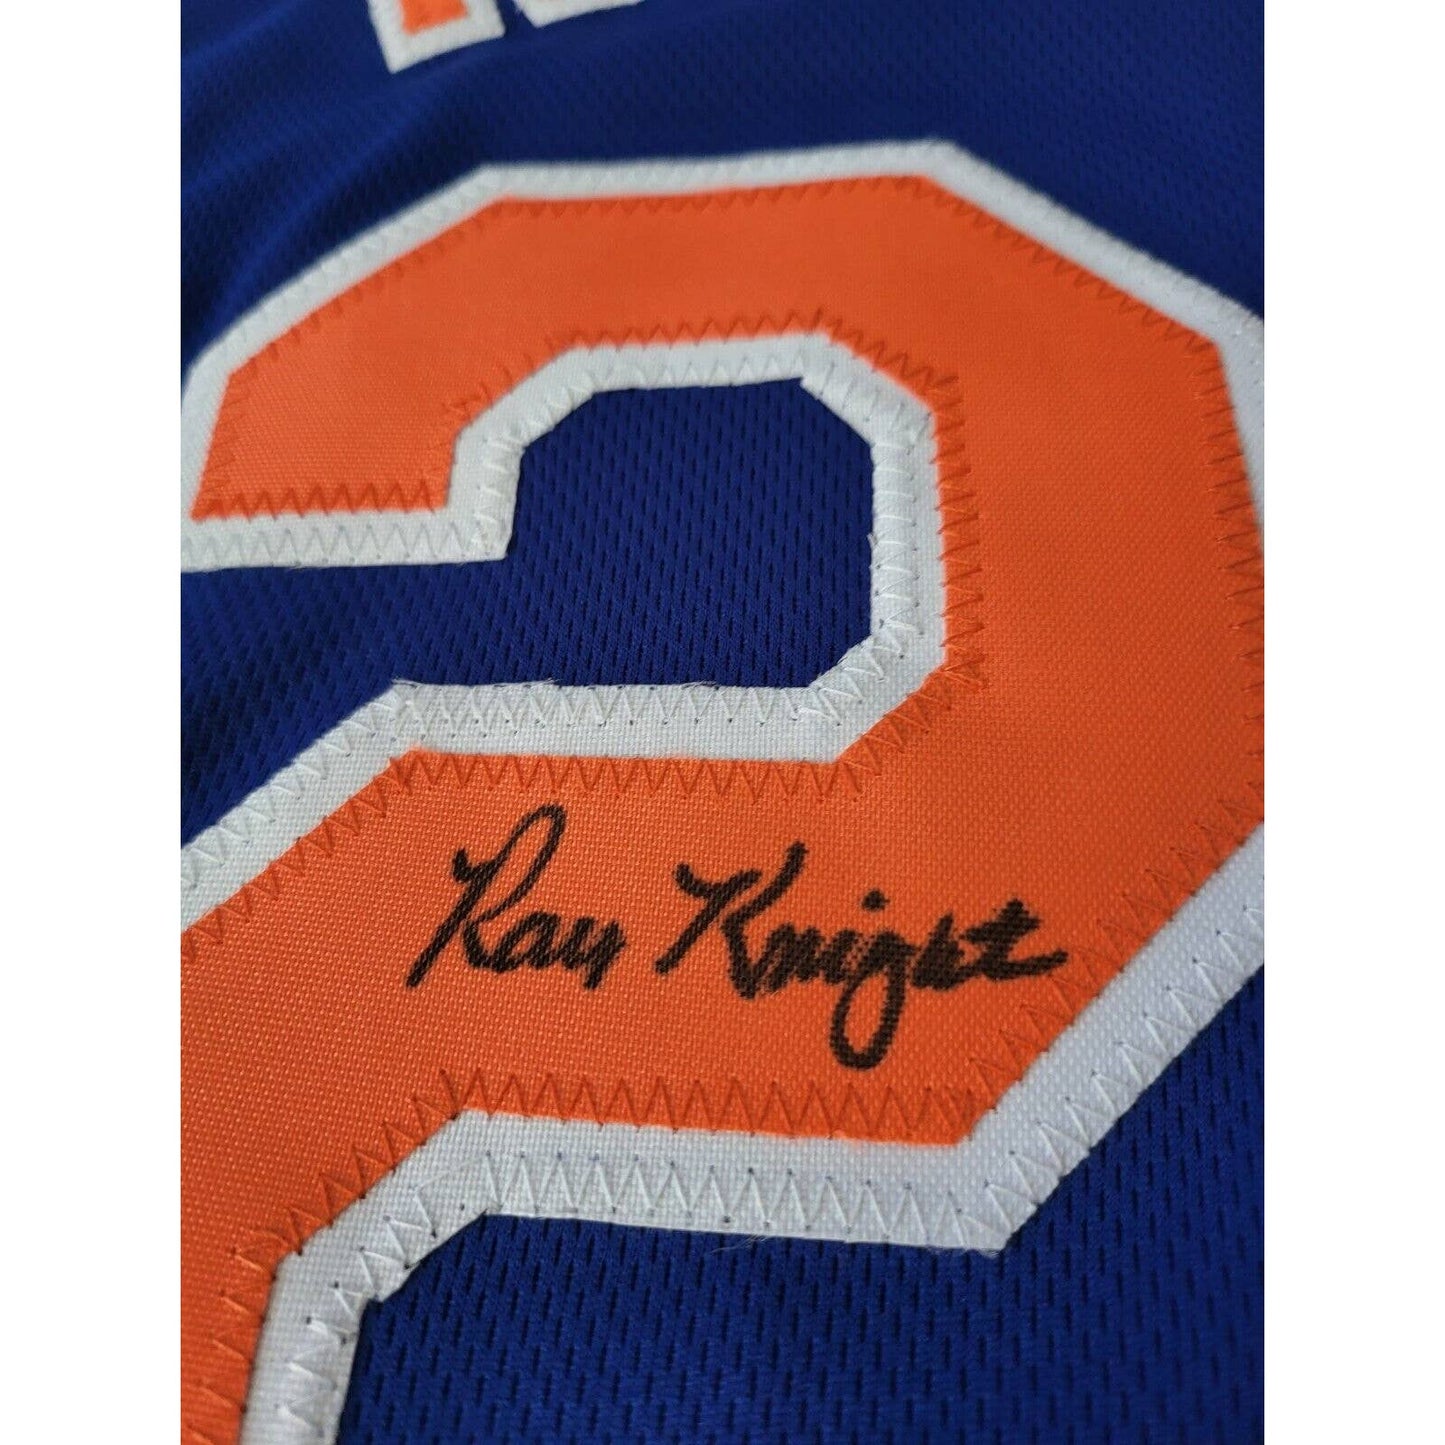 Ray Knight Autographed/Signed Jersey New York Mets NY - TreasuresEvolved